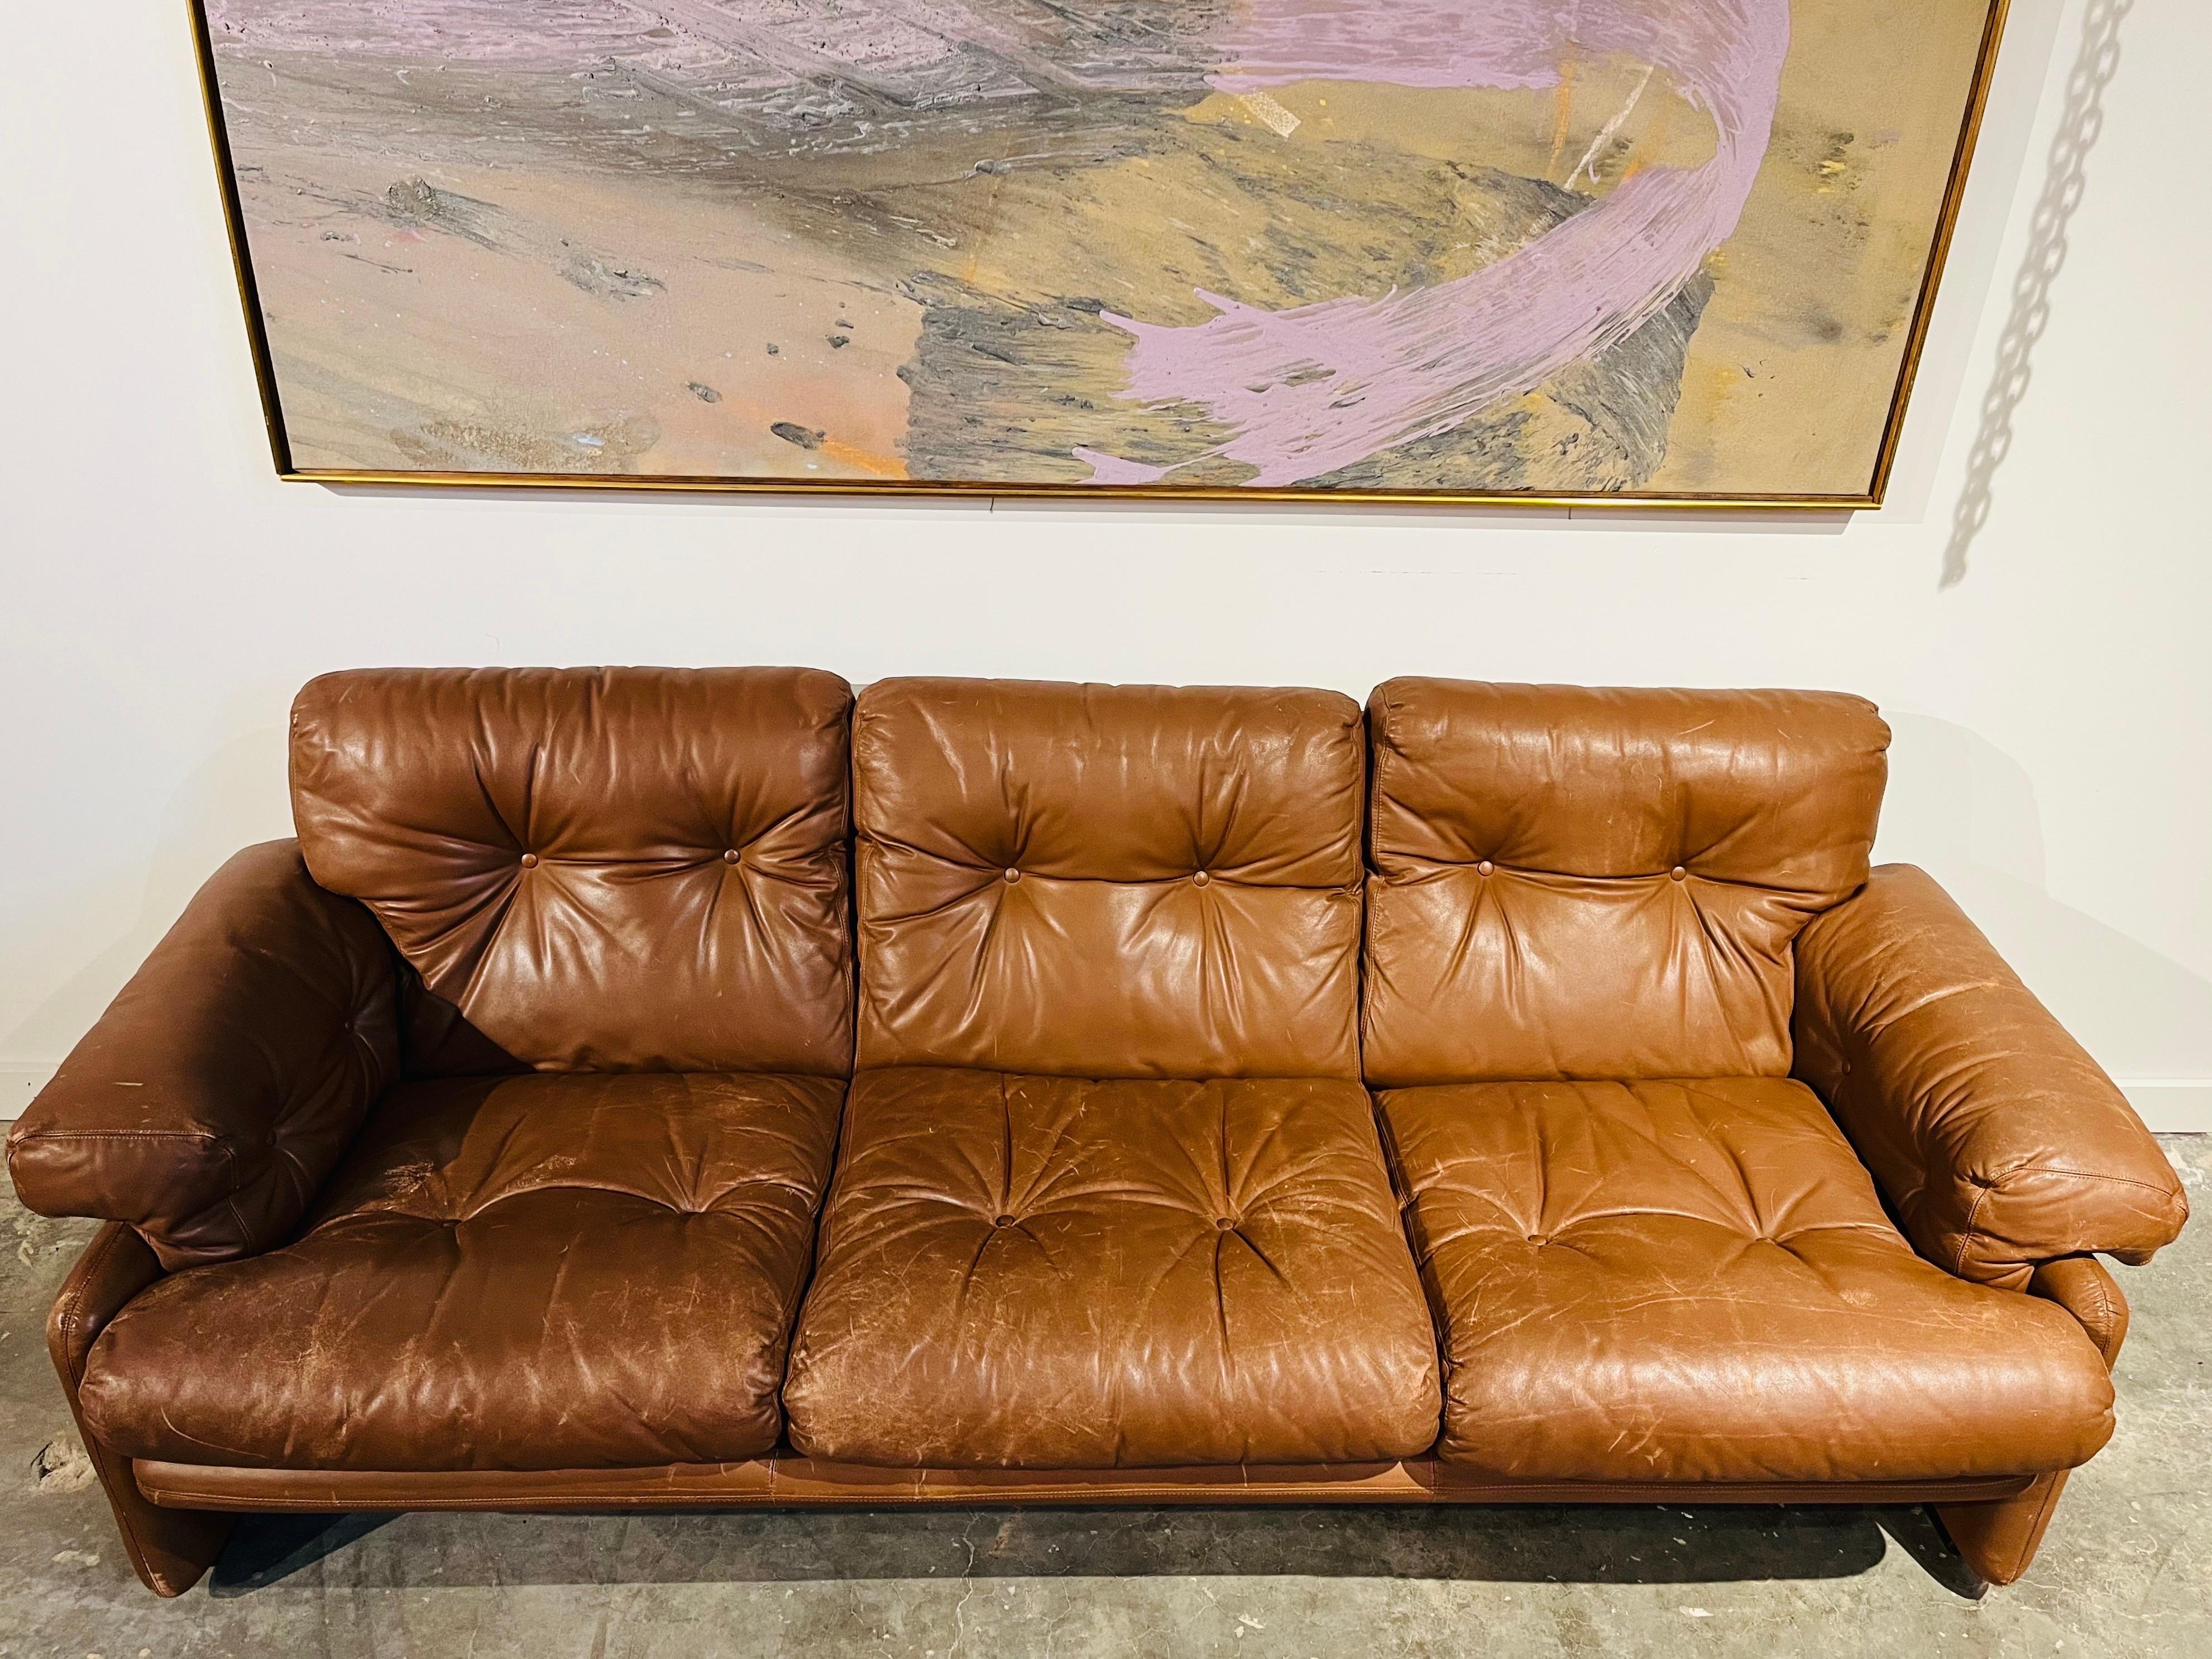 A vintage chocolate brown leather Coronado sofa by Afra and Tobia Scarpa for C and B Italia (C&B Italia) and retailed through Atelier International in New York City. This luxuriously comfortable, leather three seater sofa is a classic design first